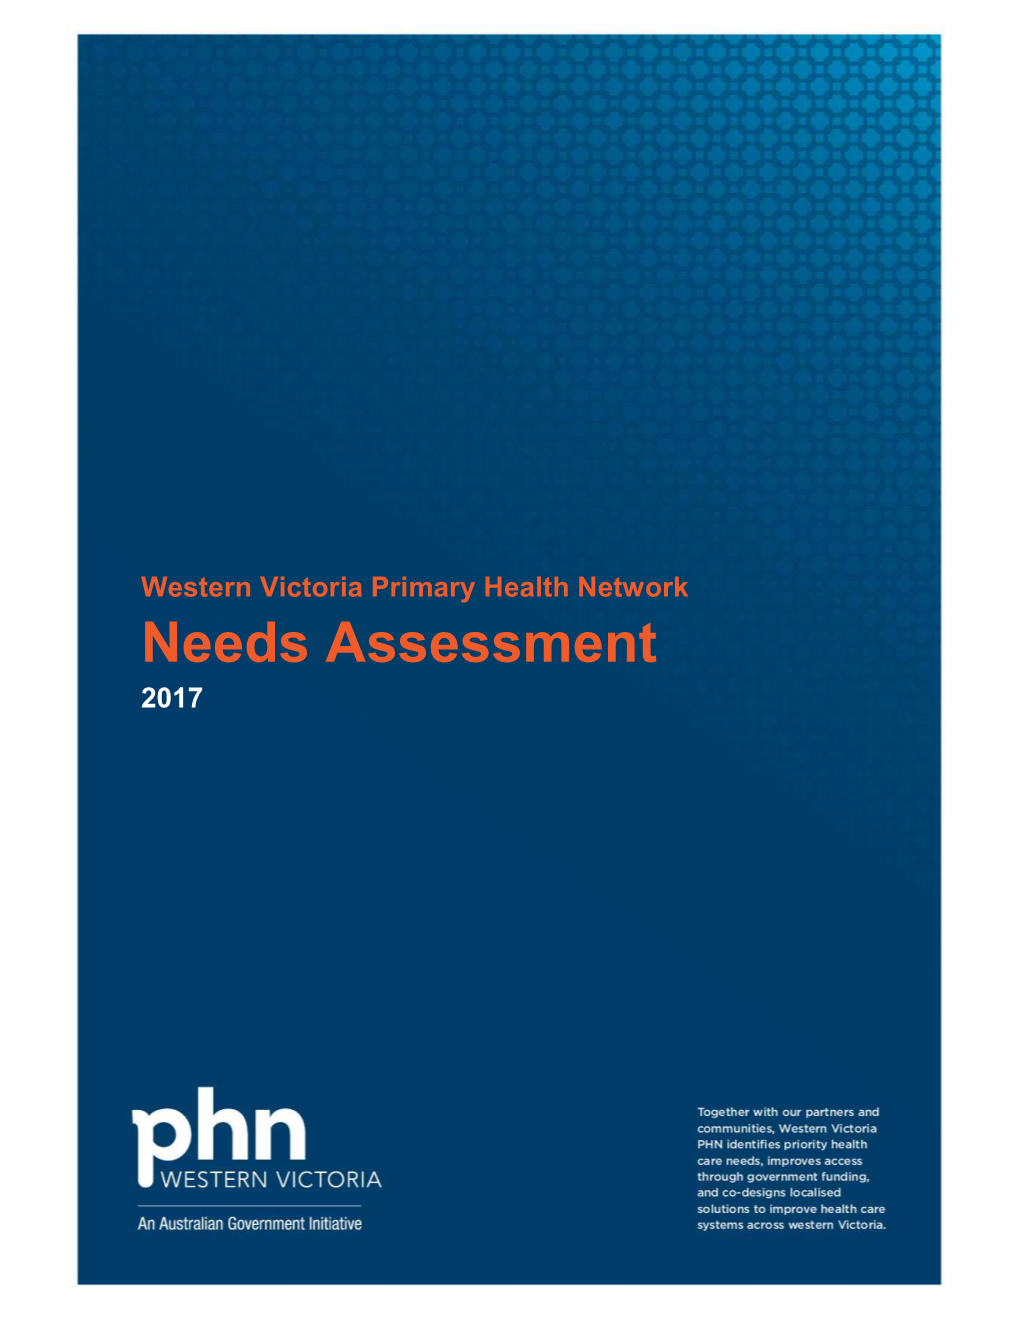 Western Victoria Primary Health Network Needs Assessment 2017